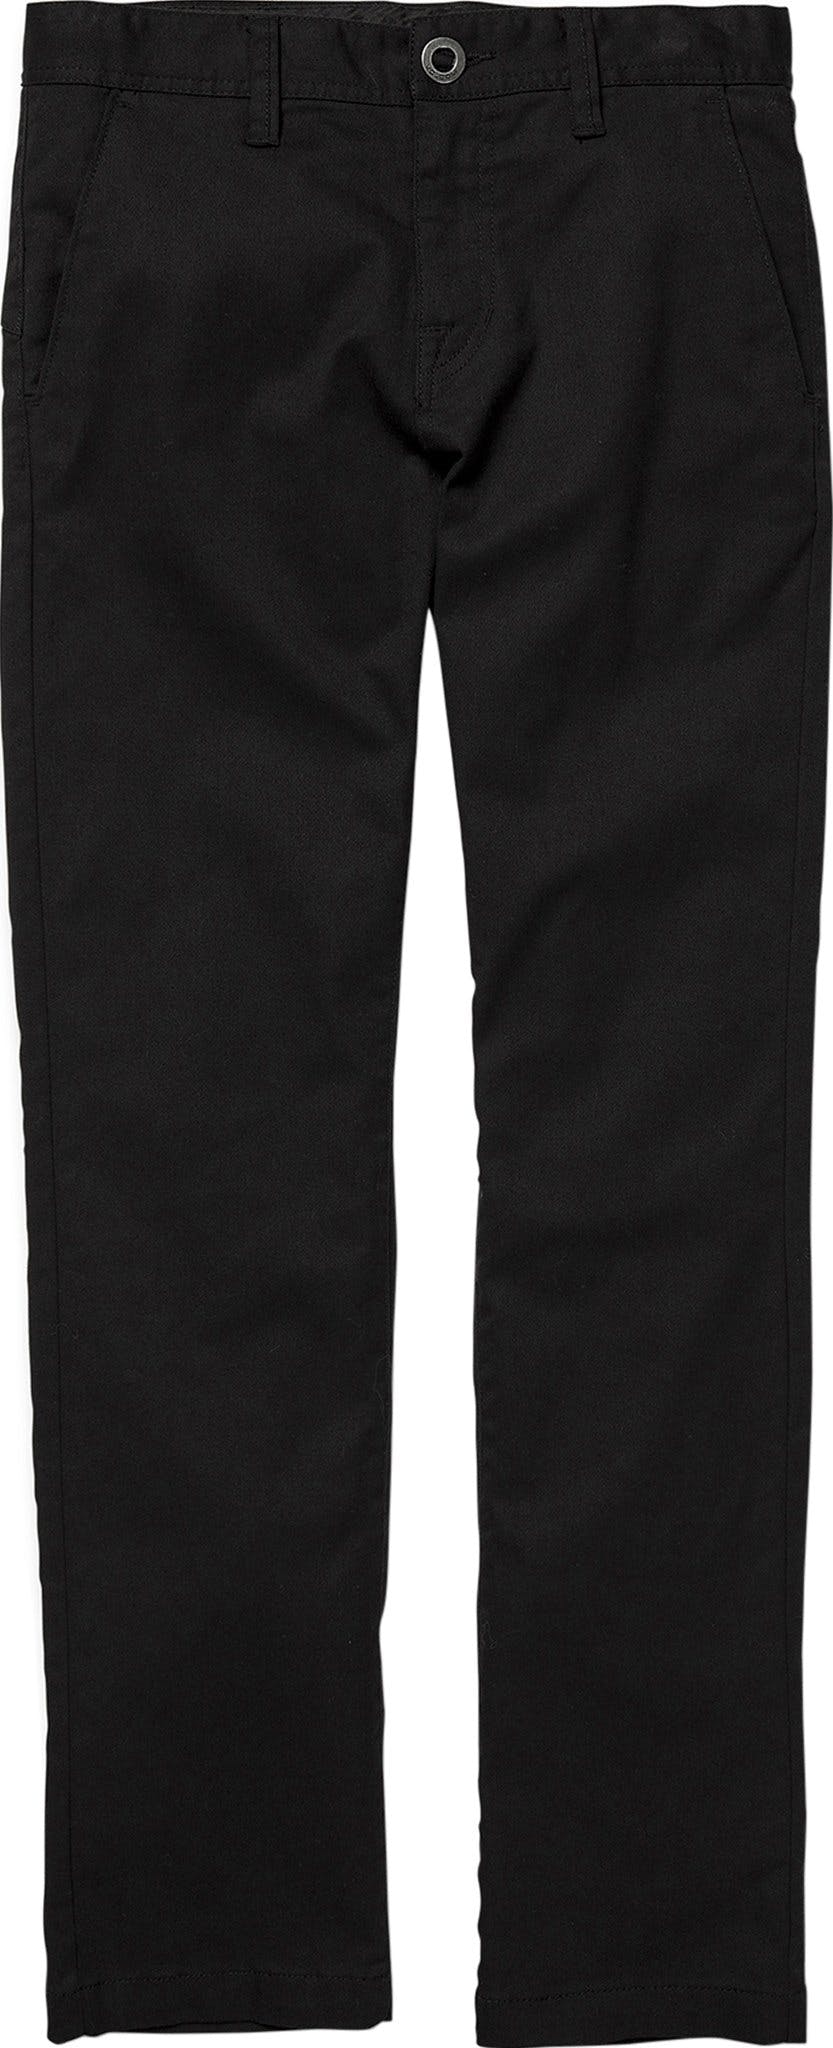 Product image for Frickin Modern Fit Stretch Pants - Boys